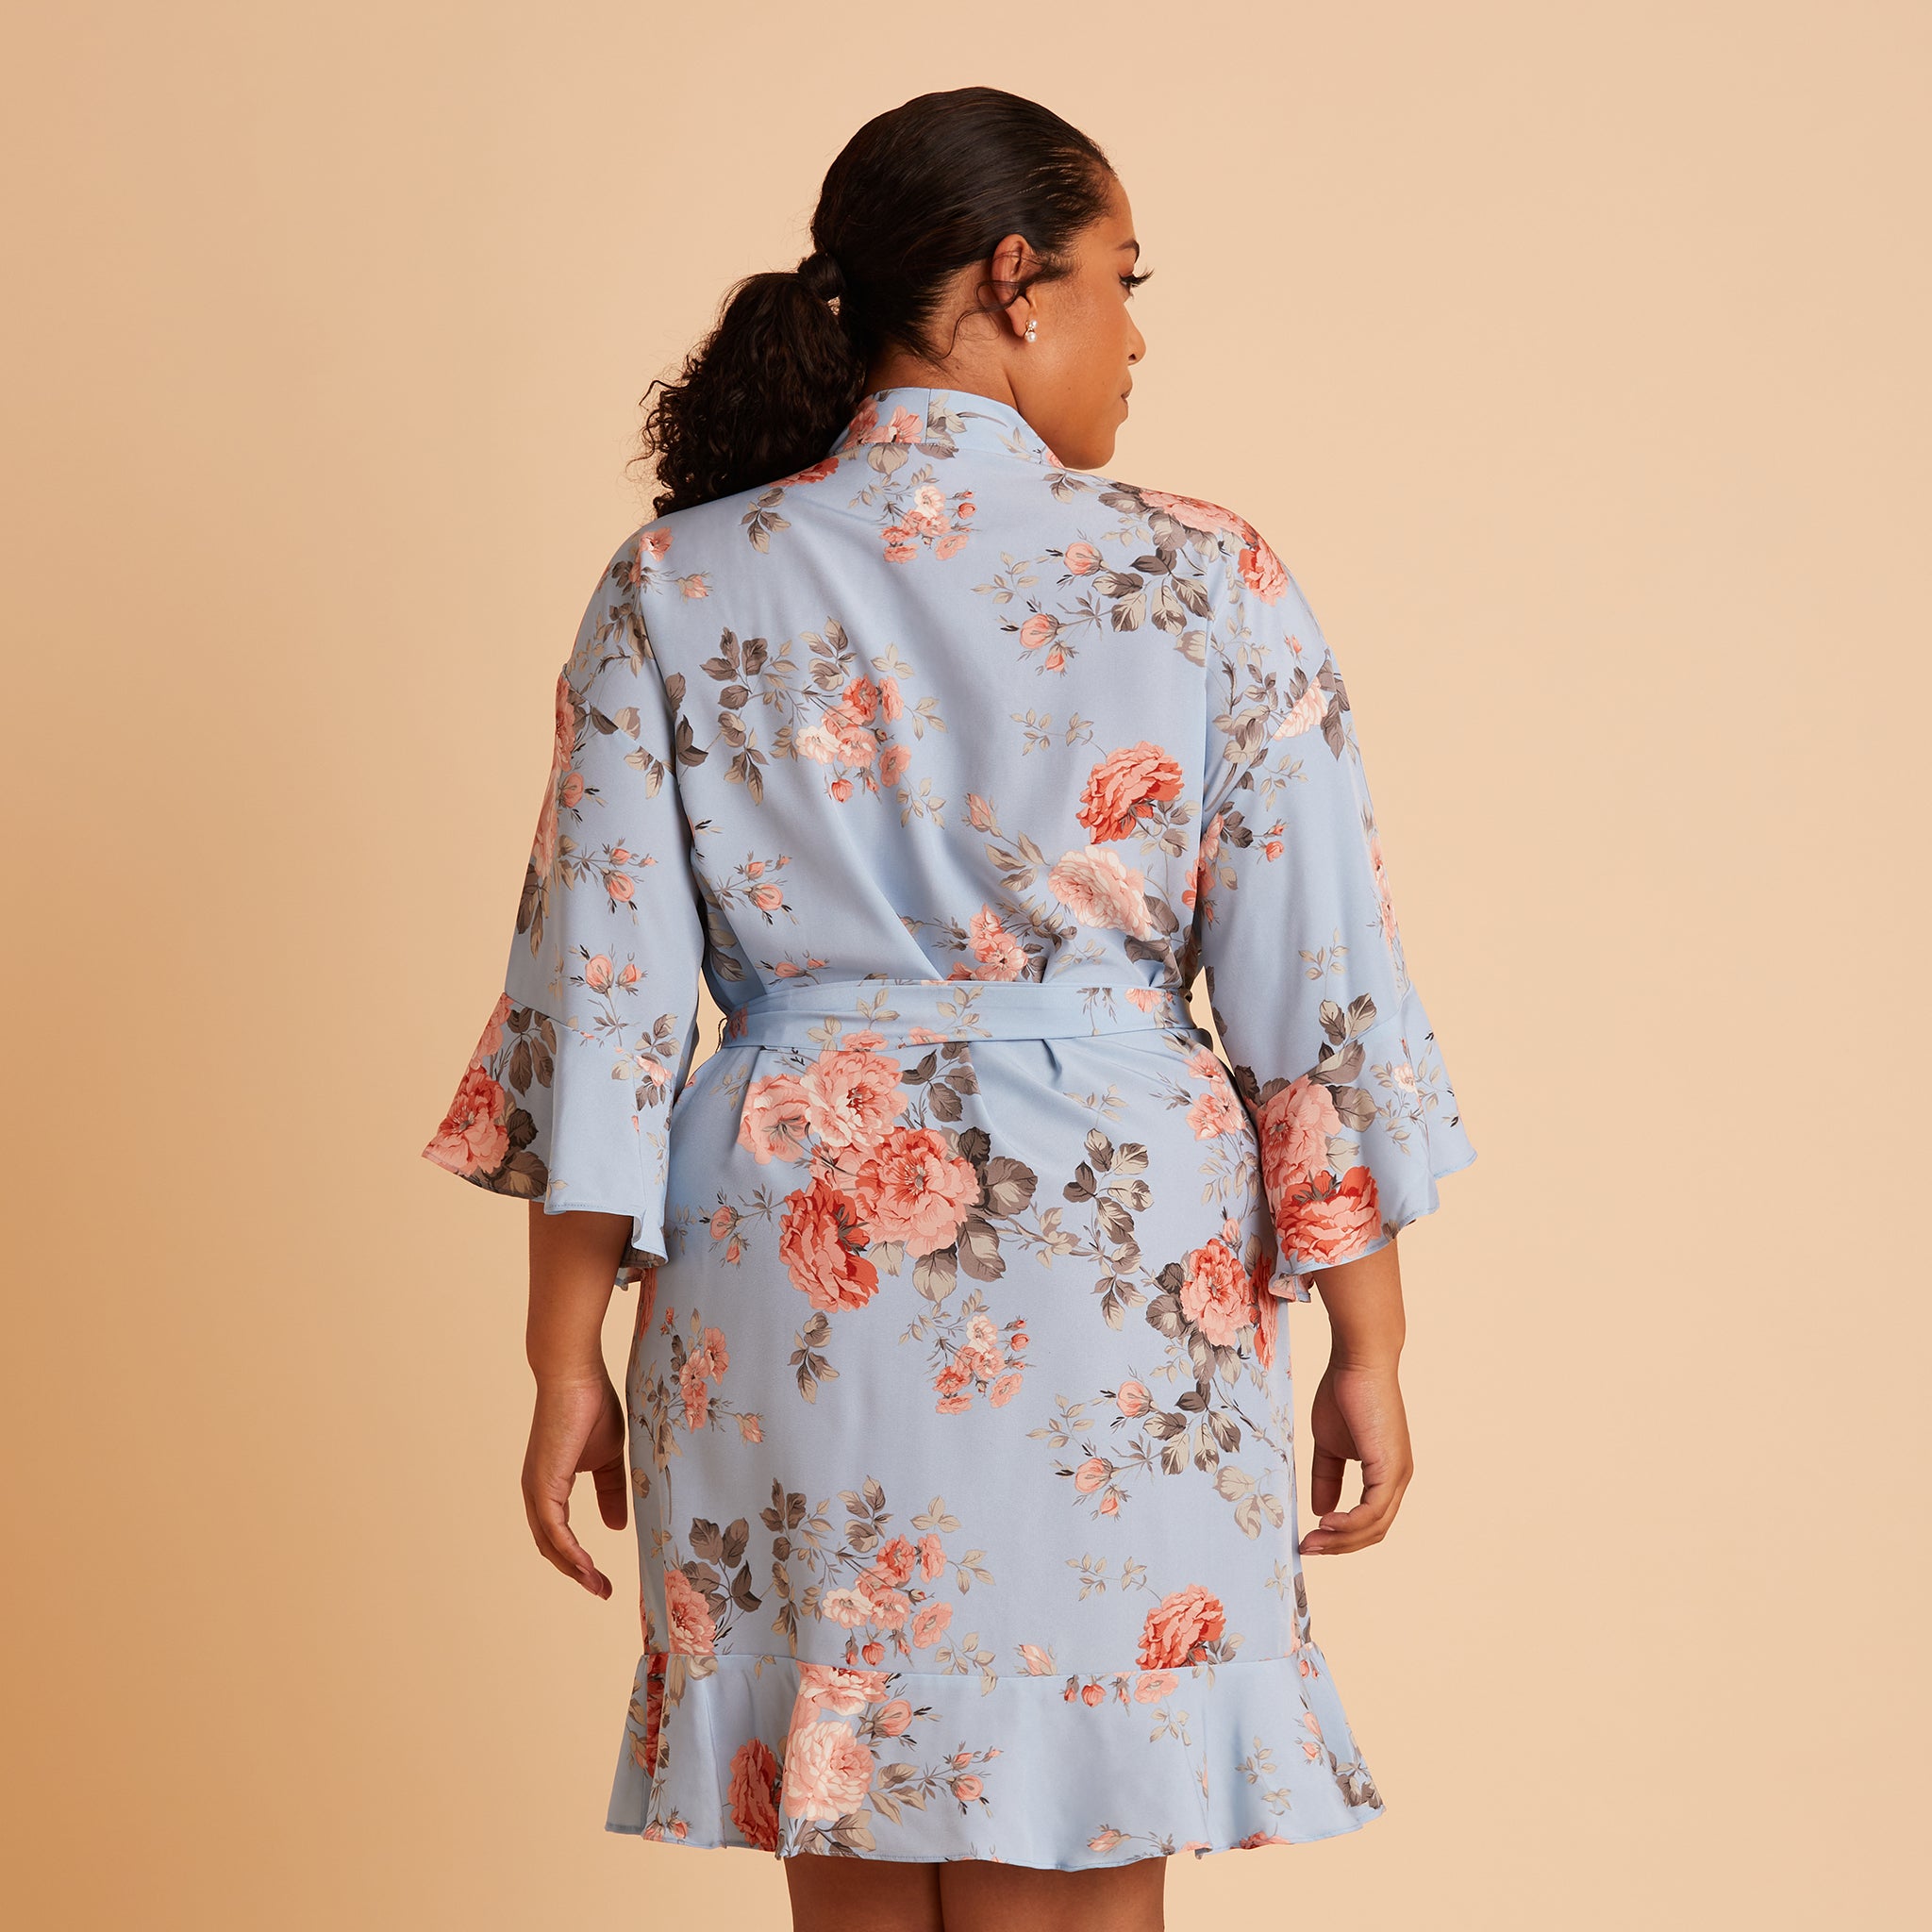 Kenny Ruffle Robe in Dusty Blue Floral by Birdy Grey, back view